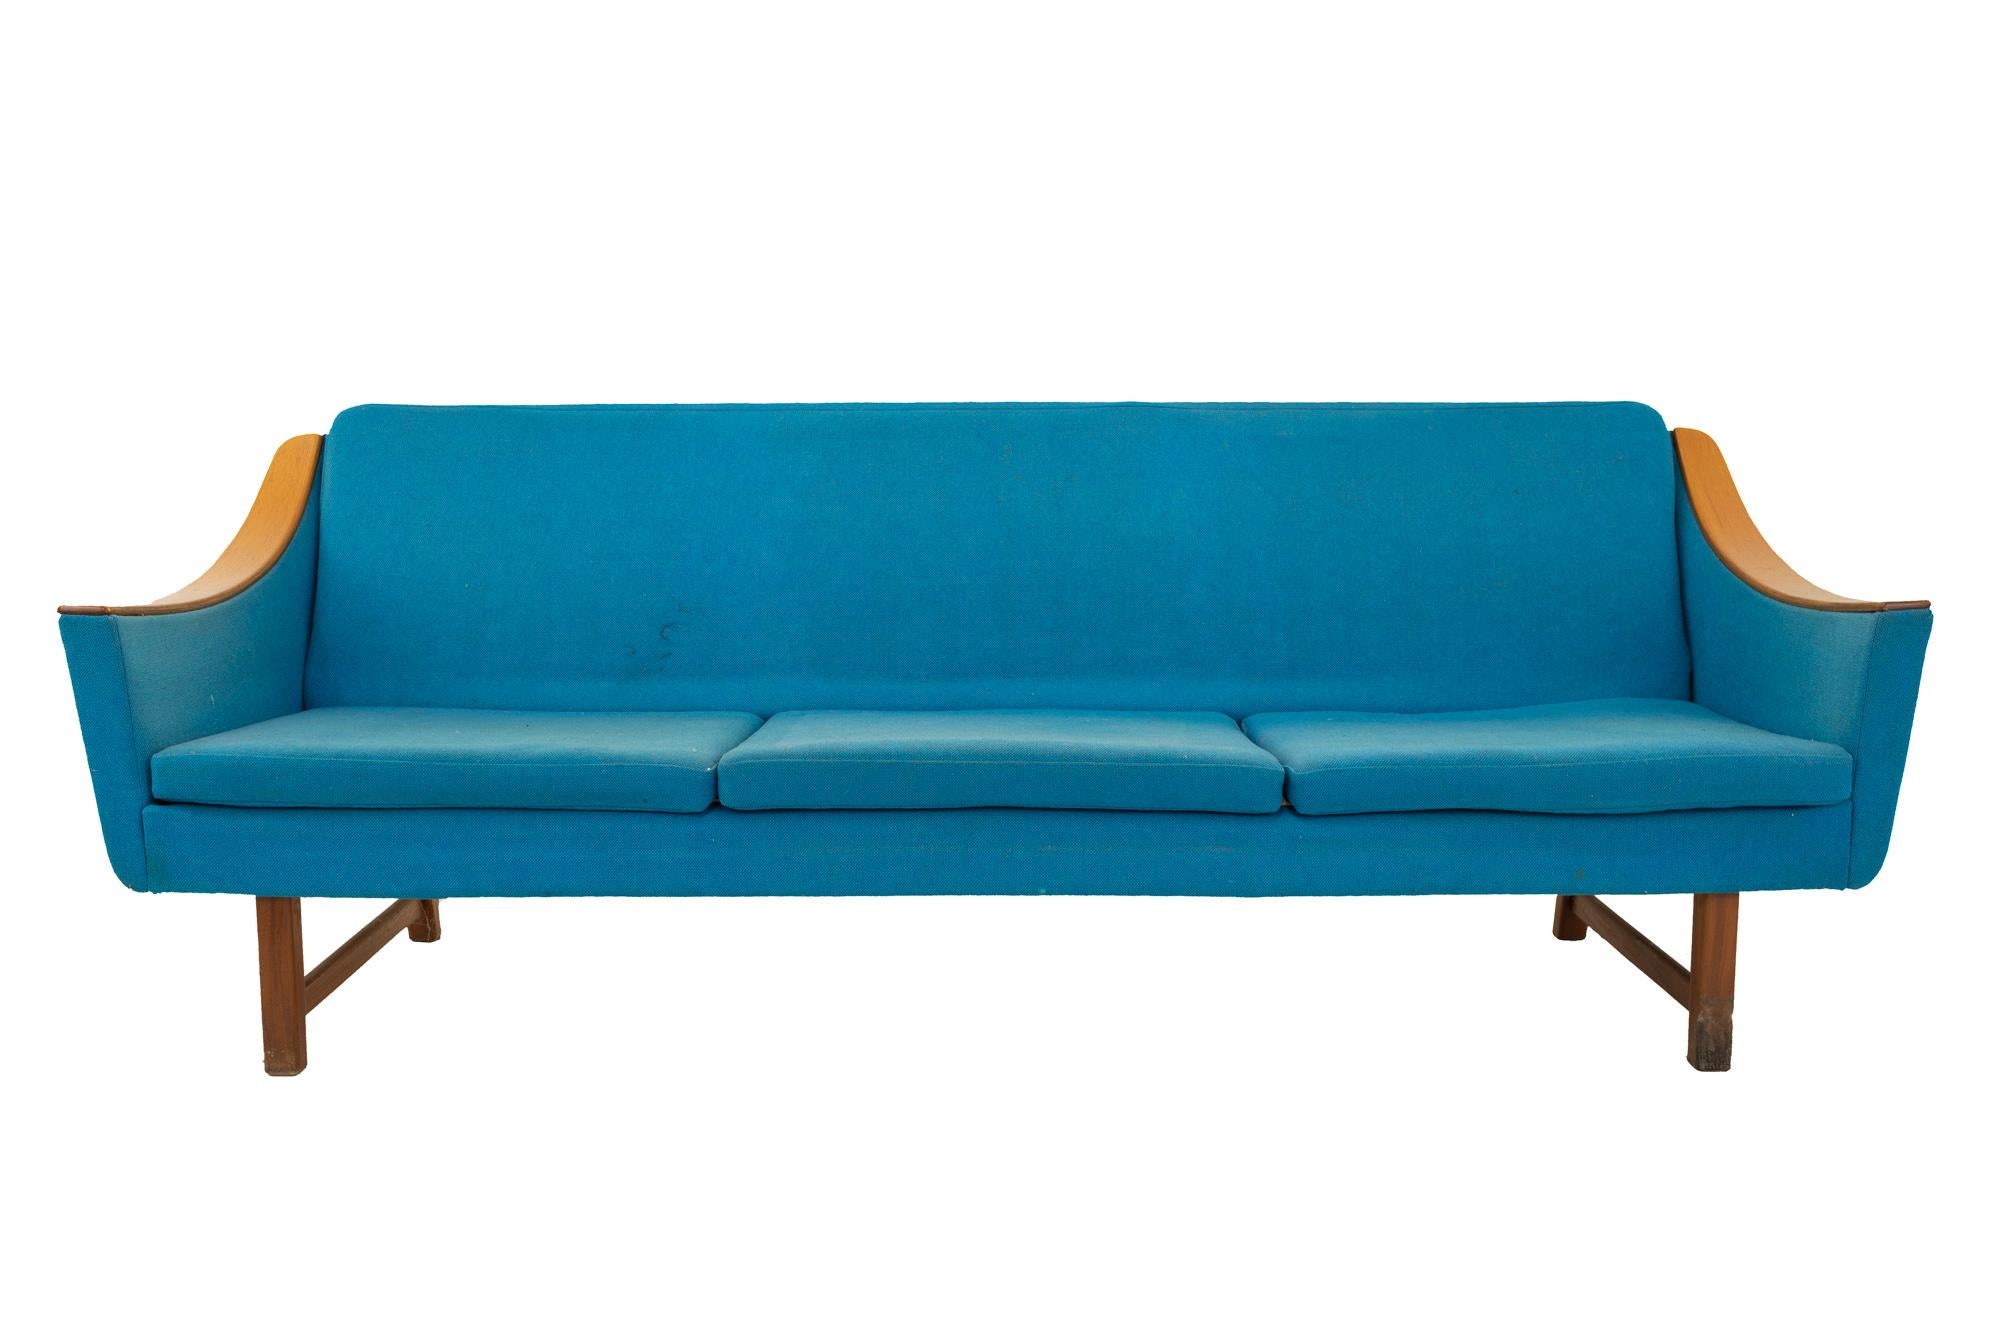 Dux style Mid Century teak and teal sleeper sofa
Sofa measures: 87 wide x 32 deep x 31.5 high, with seat height of 15.5 inches

All pieces of furniture can be had in what we call restored vintage condition. This means the piece is restored upon